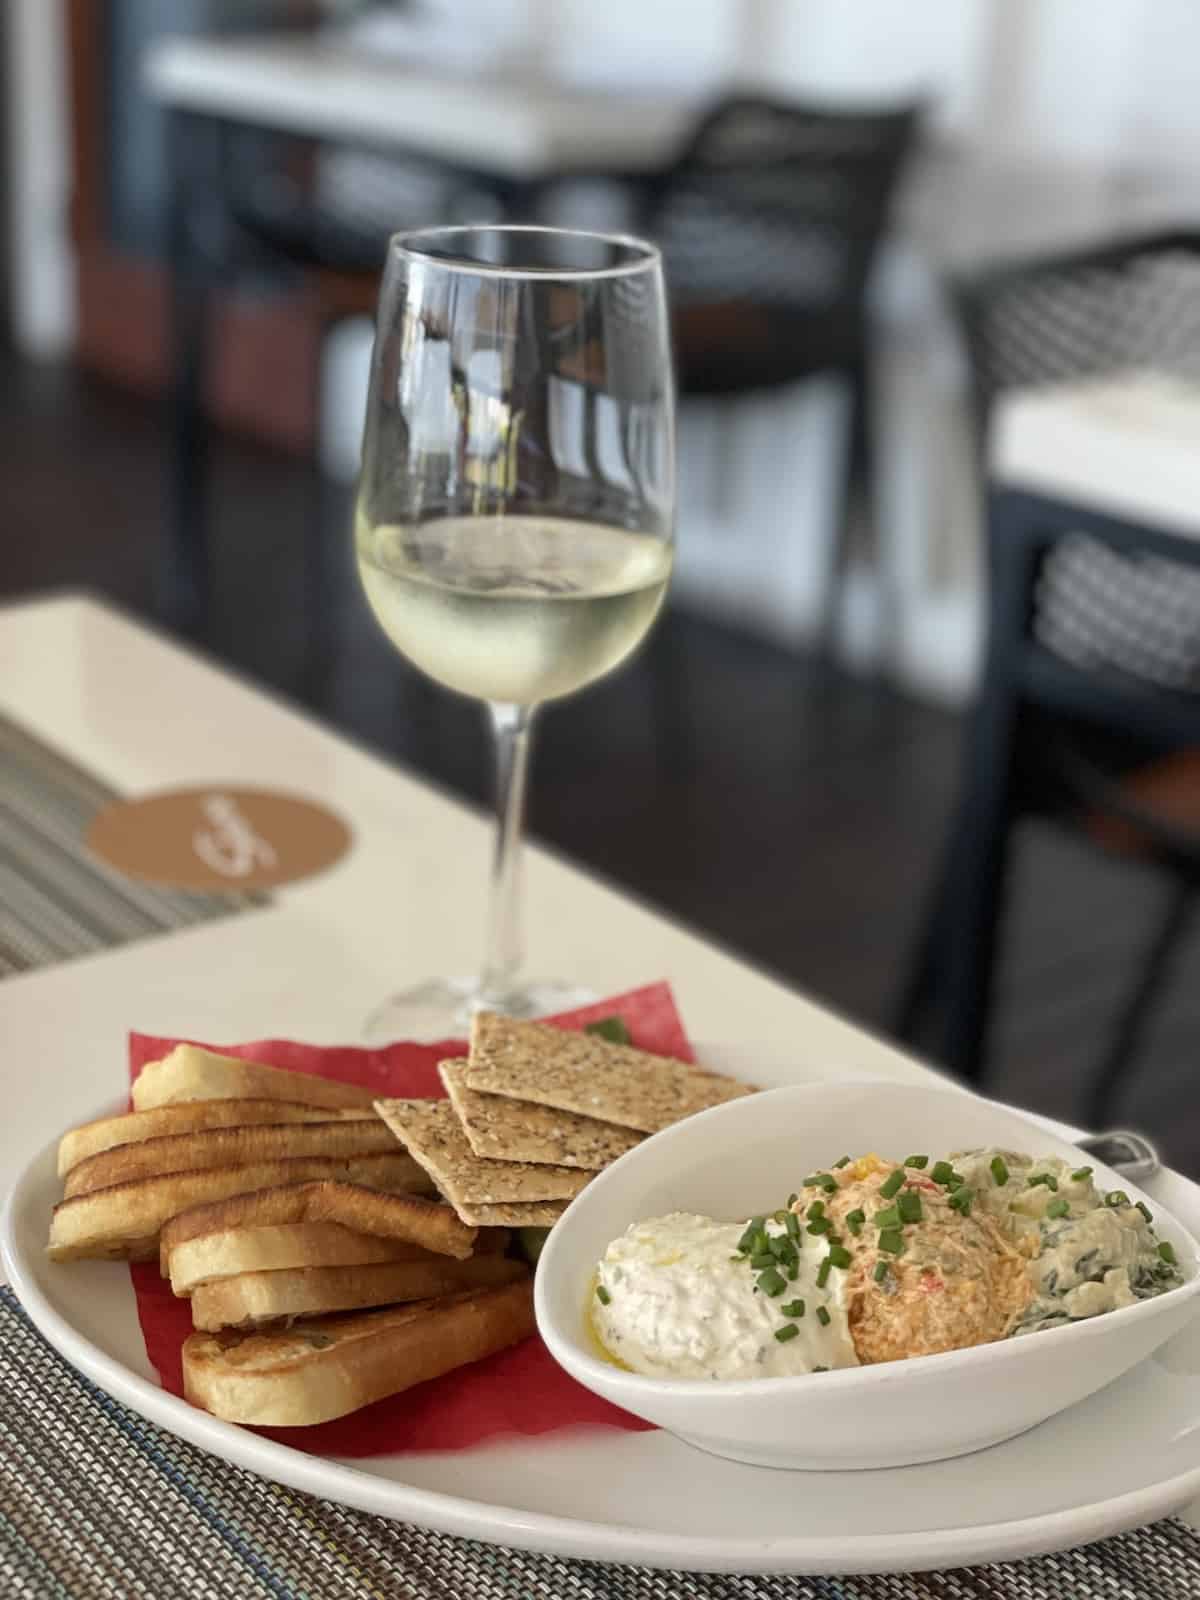 Glass of wine and fish dip with bread and crackers.